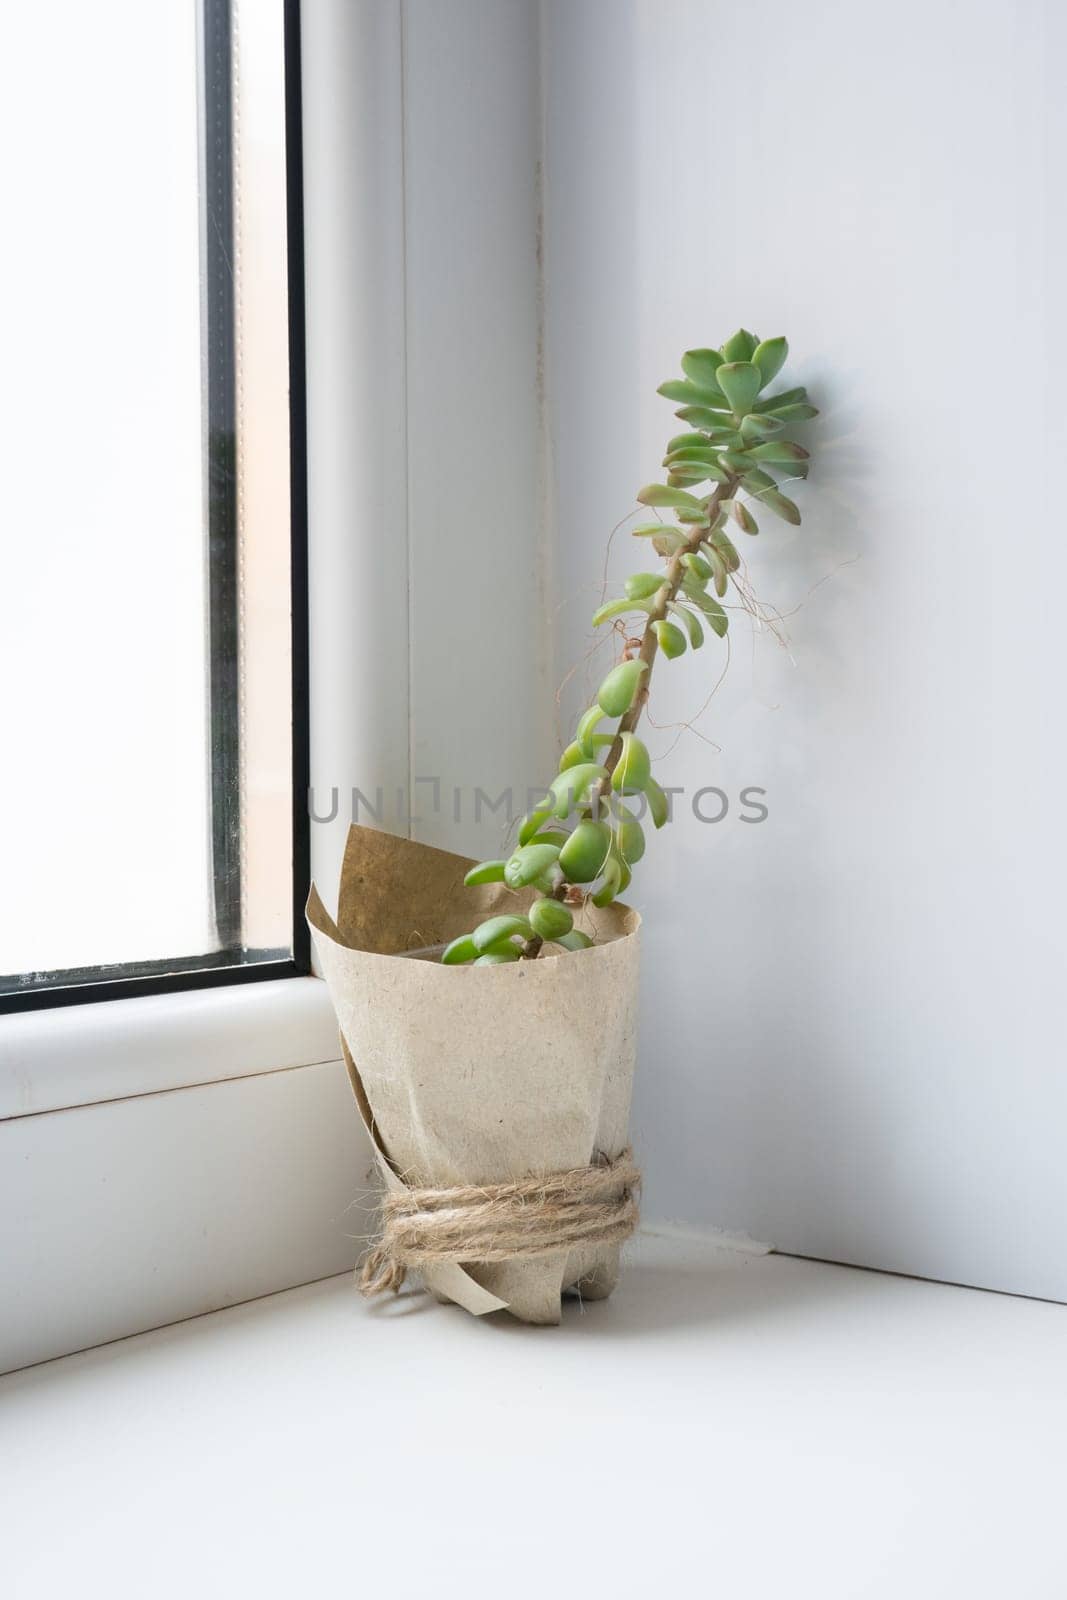 The echeveria succulent has stretched out due to lack of light. etiolation of succulents.